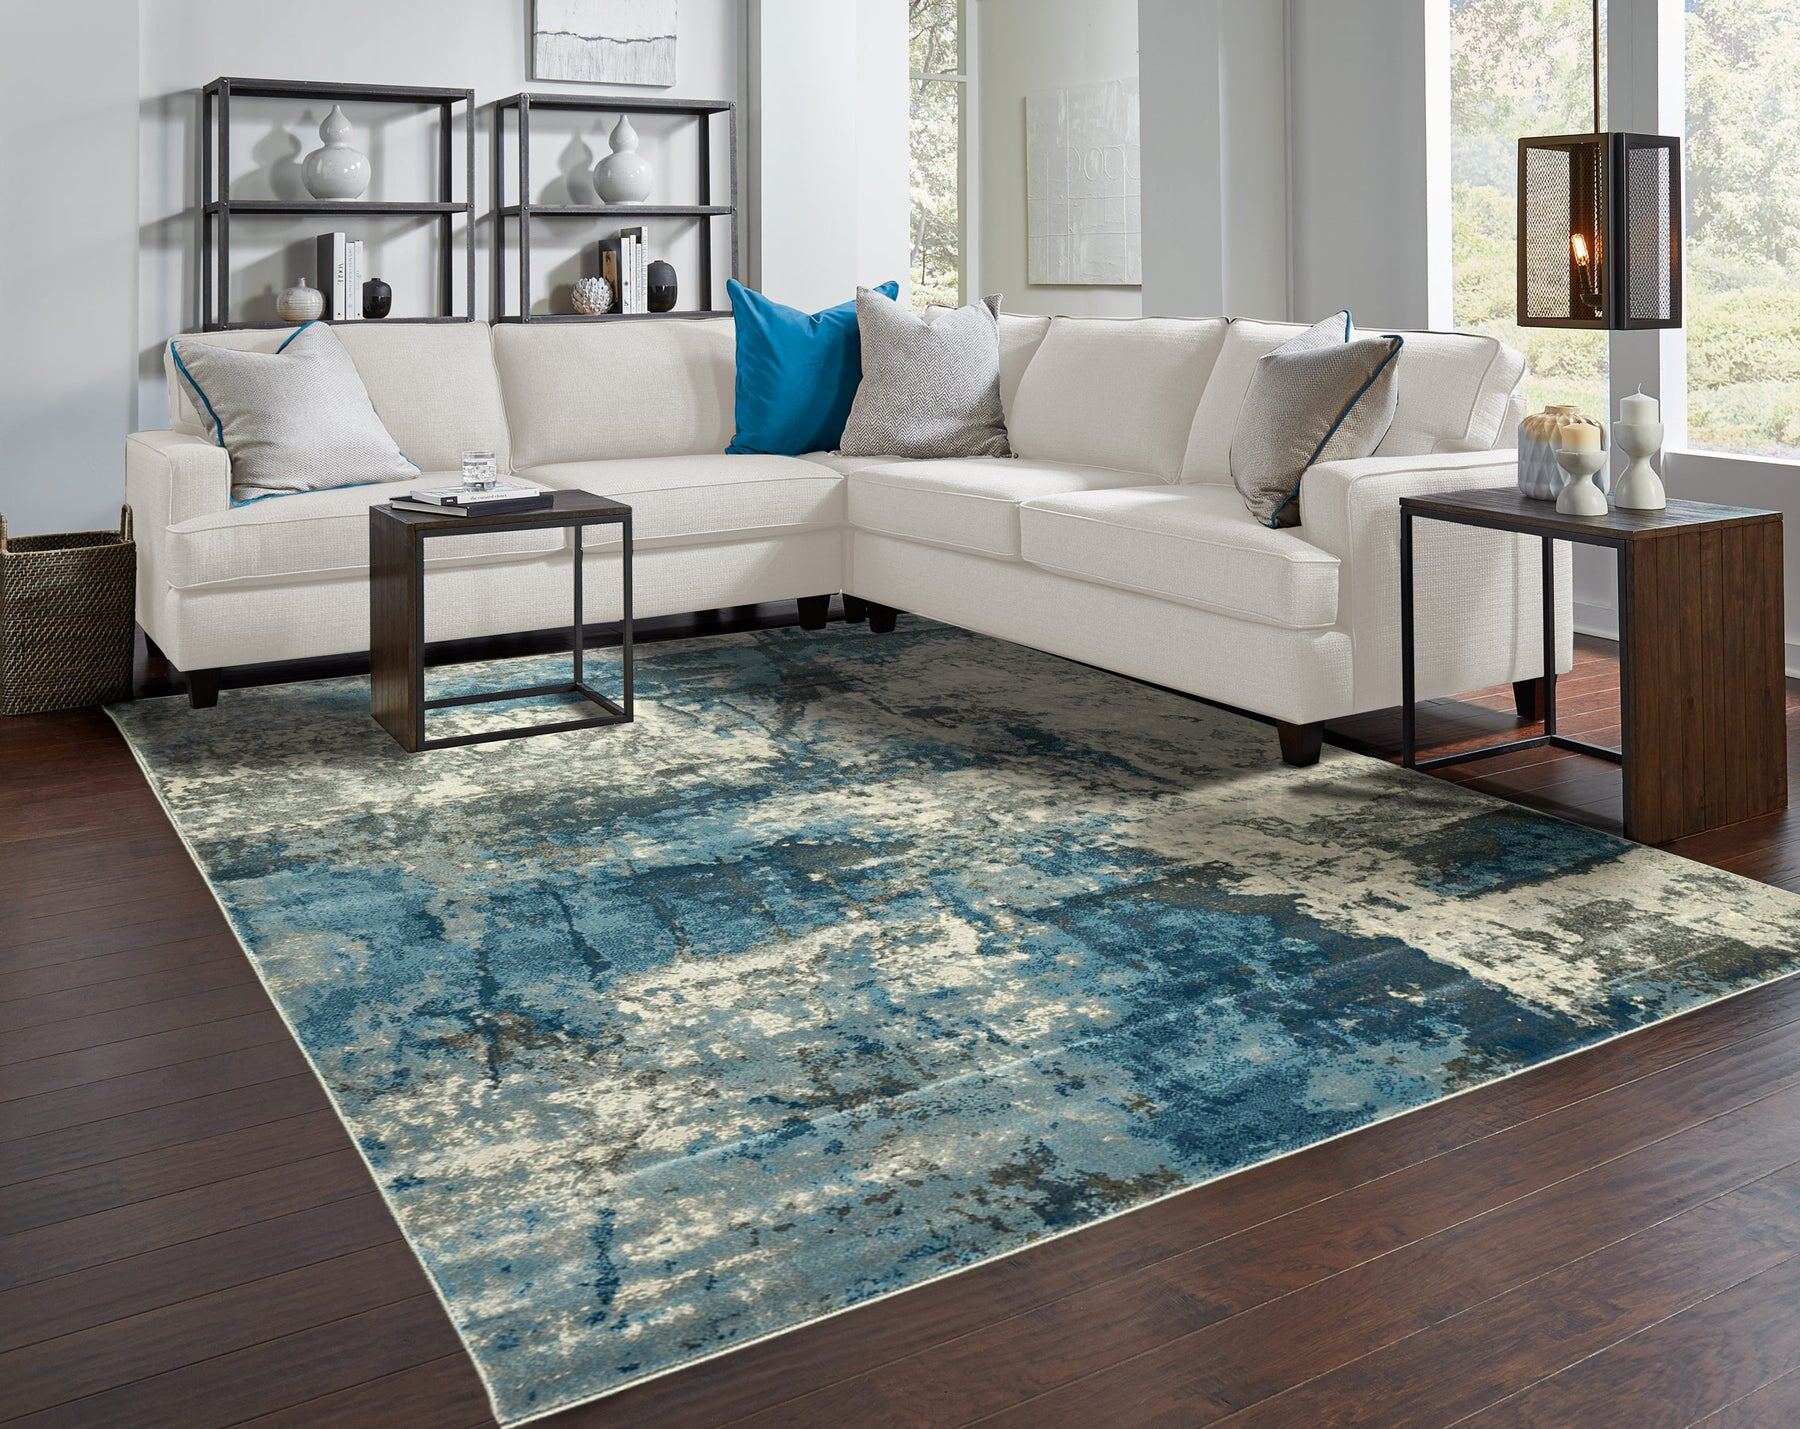 10 Perfect Rug Types for a Coastal Look